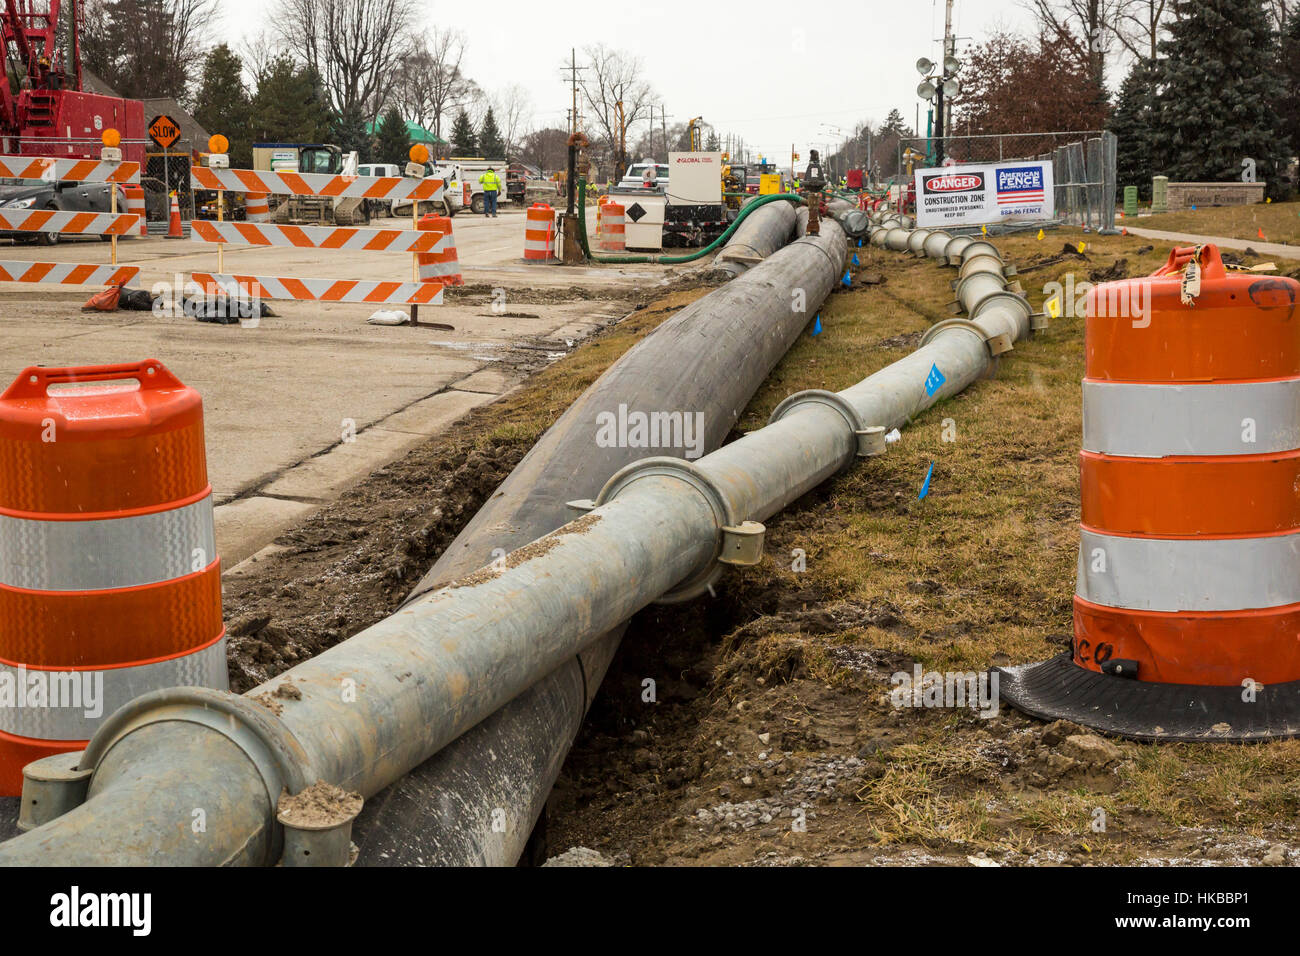 Fraser, USA. 27th January, 2017. The collapse of an 11-foot-wide underground sewer line threatens environmental problems for 11 communities in suburban Detroit. The collapse created a sinkhole that destroyed three houses. Officials estimate that repairing the sewer line could cost $100 million. Until the line is fixed, they say it may be necessary to divert raw sewage into the Clinton River. Credit: Jim West/Alamy Live News Stock Photo